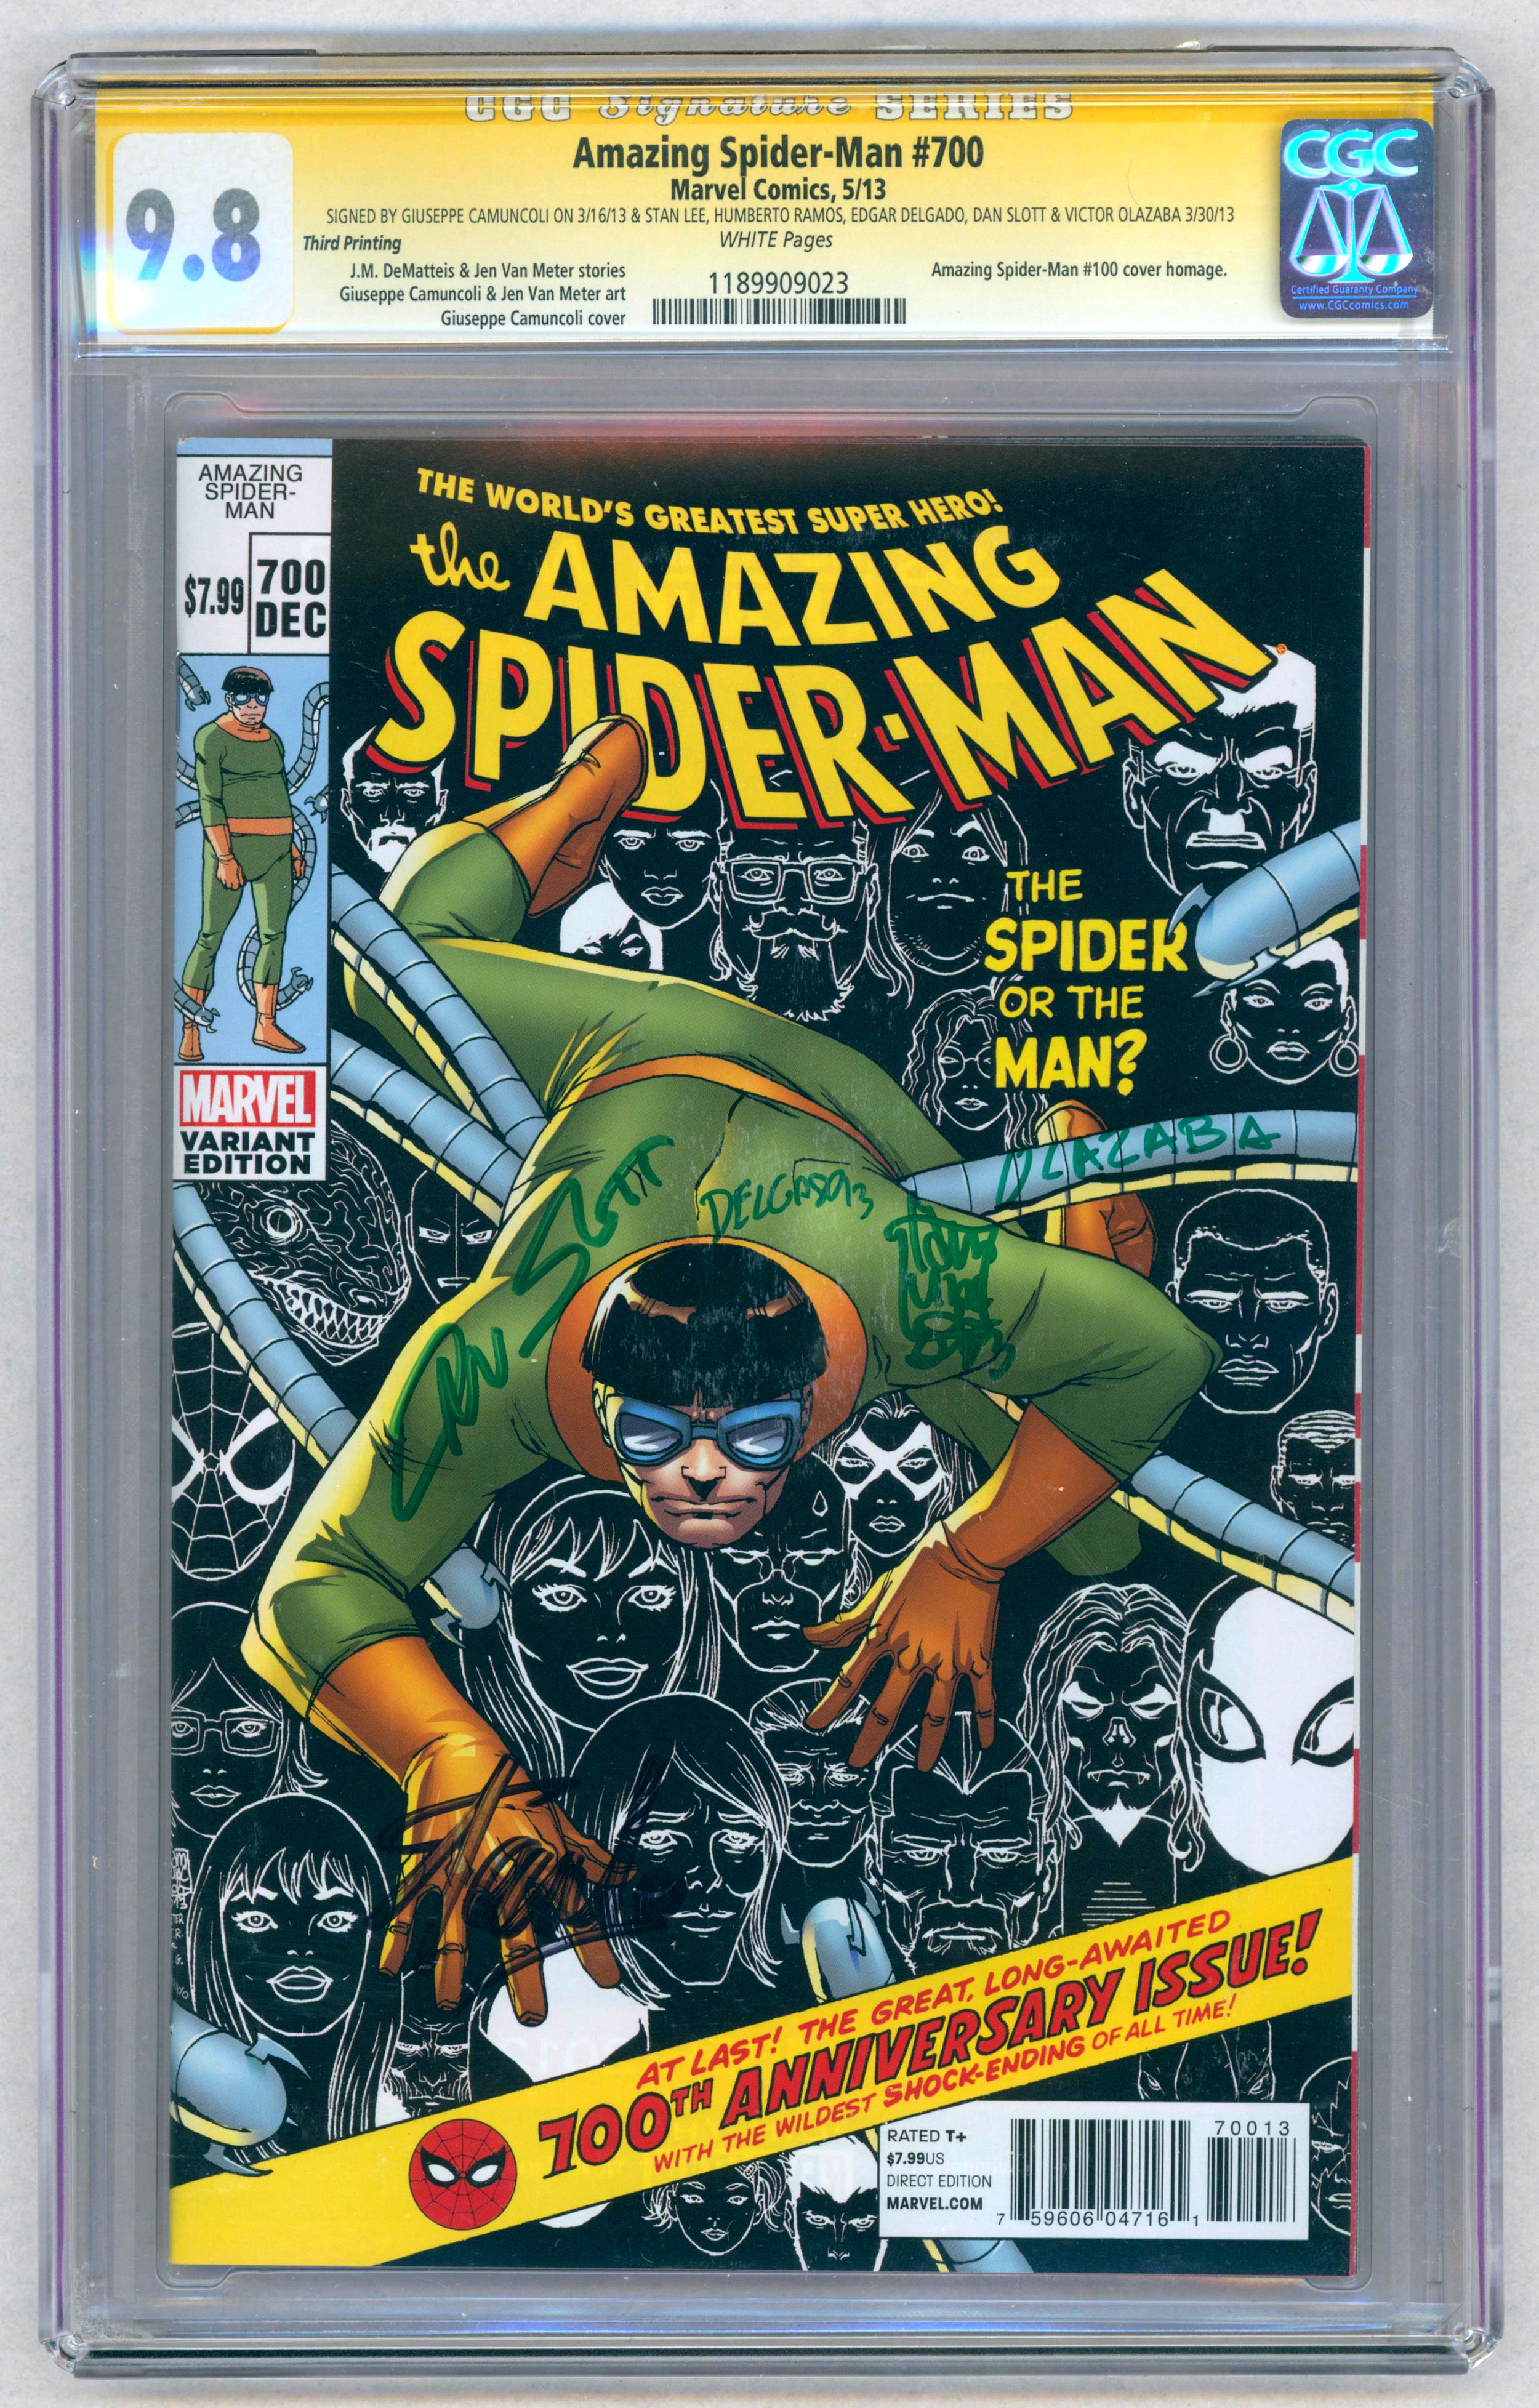 THE AMAZING SPIDER-MAN #700-(May 2013)-Graded 9.8 by CGC-Amazing Spider-Man #100 cover homage. Third